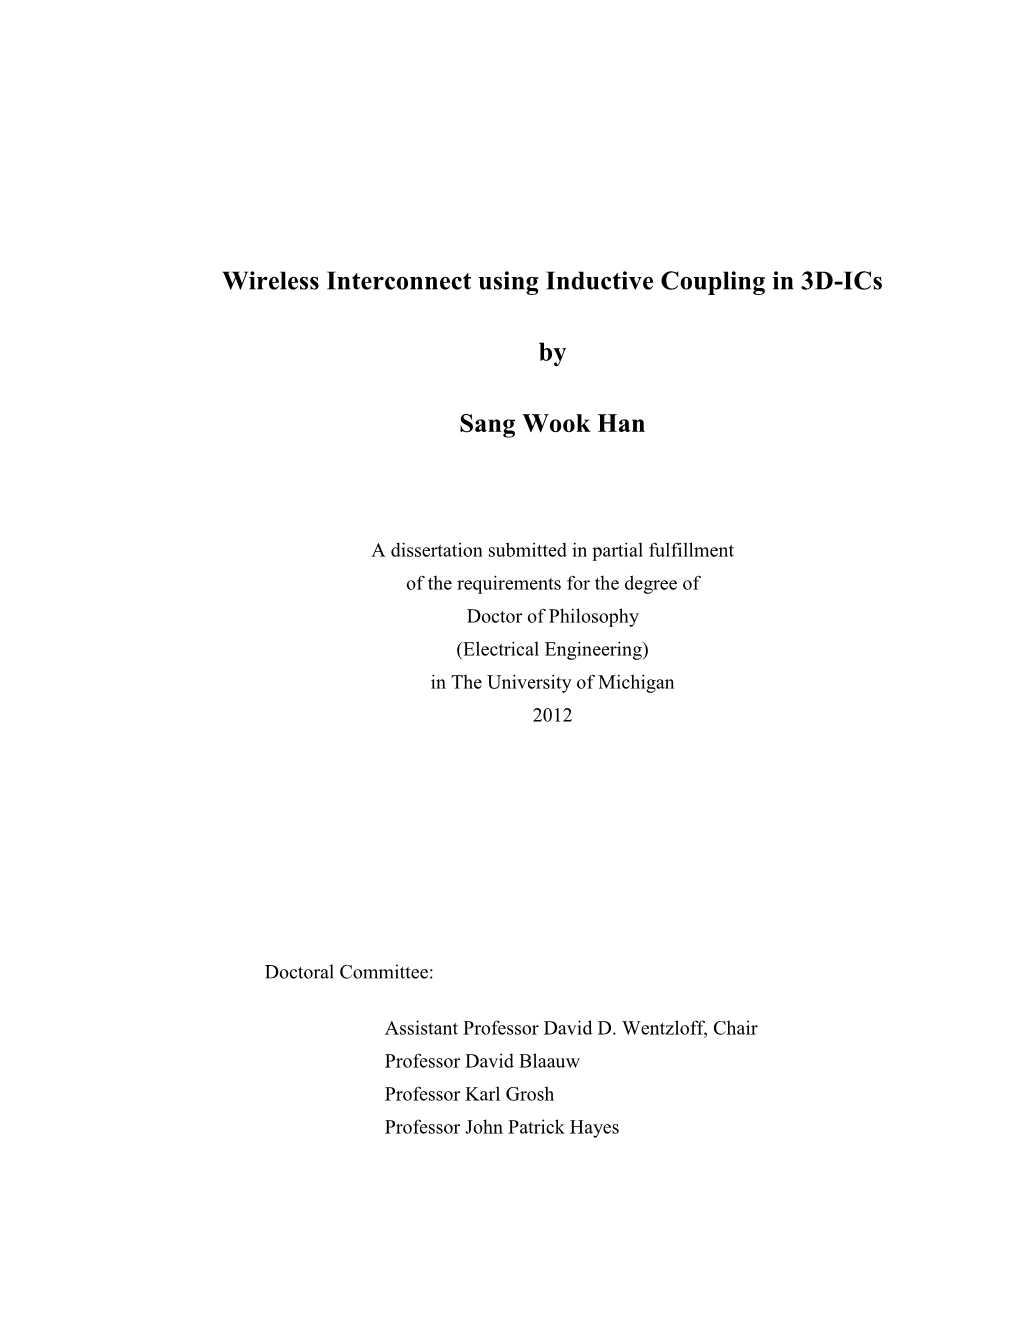 Wireless Interconnect Using Inductive Coupling in 3D-Ics by Sang Wook